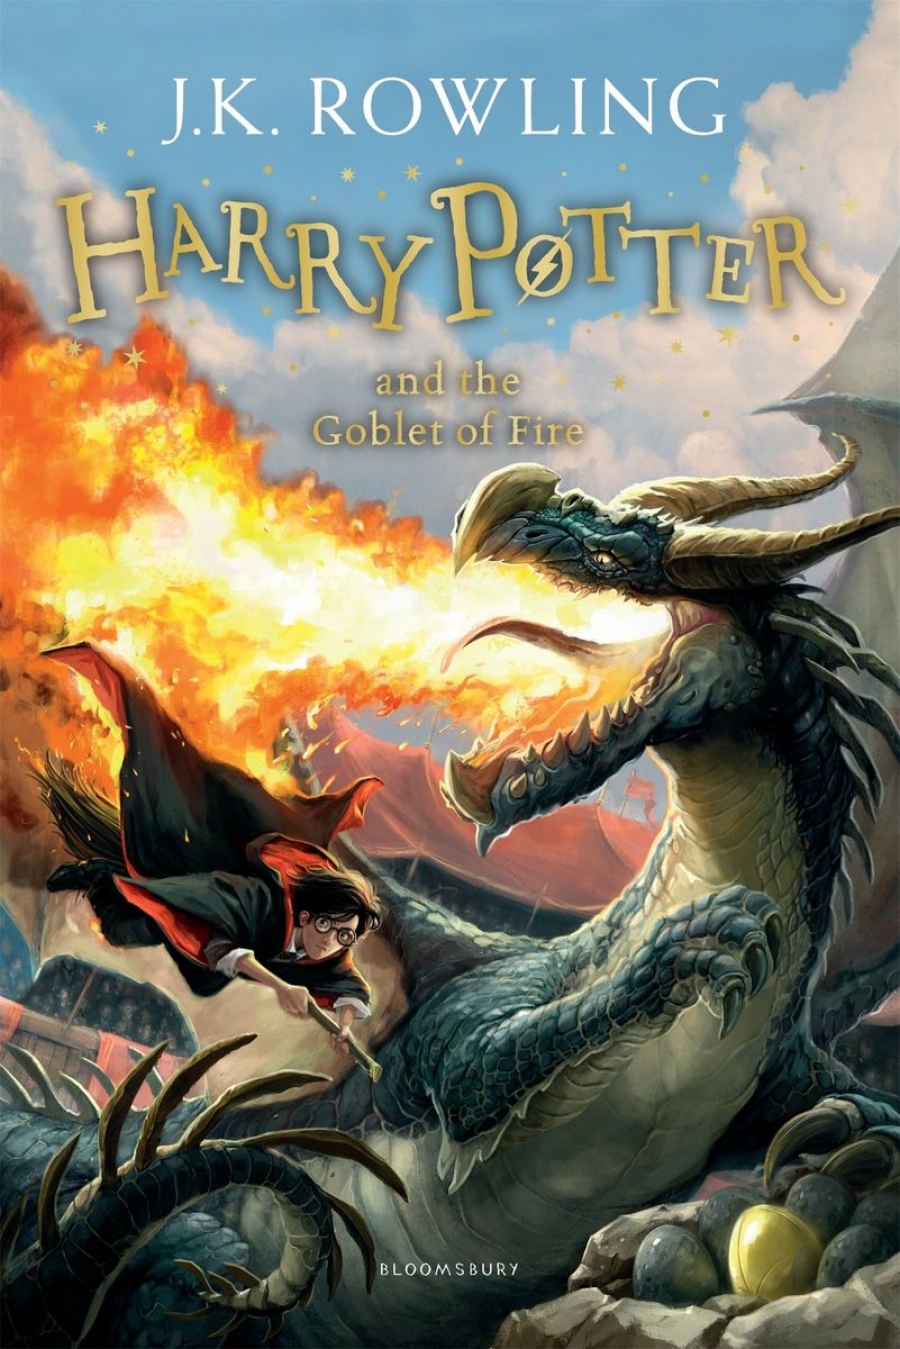 J. K. Rowling Harry Potter and the Goblet of Fire (Book 4) - Hardcover 